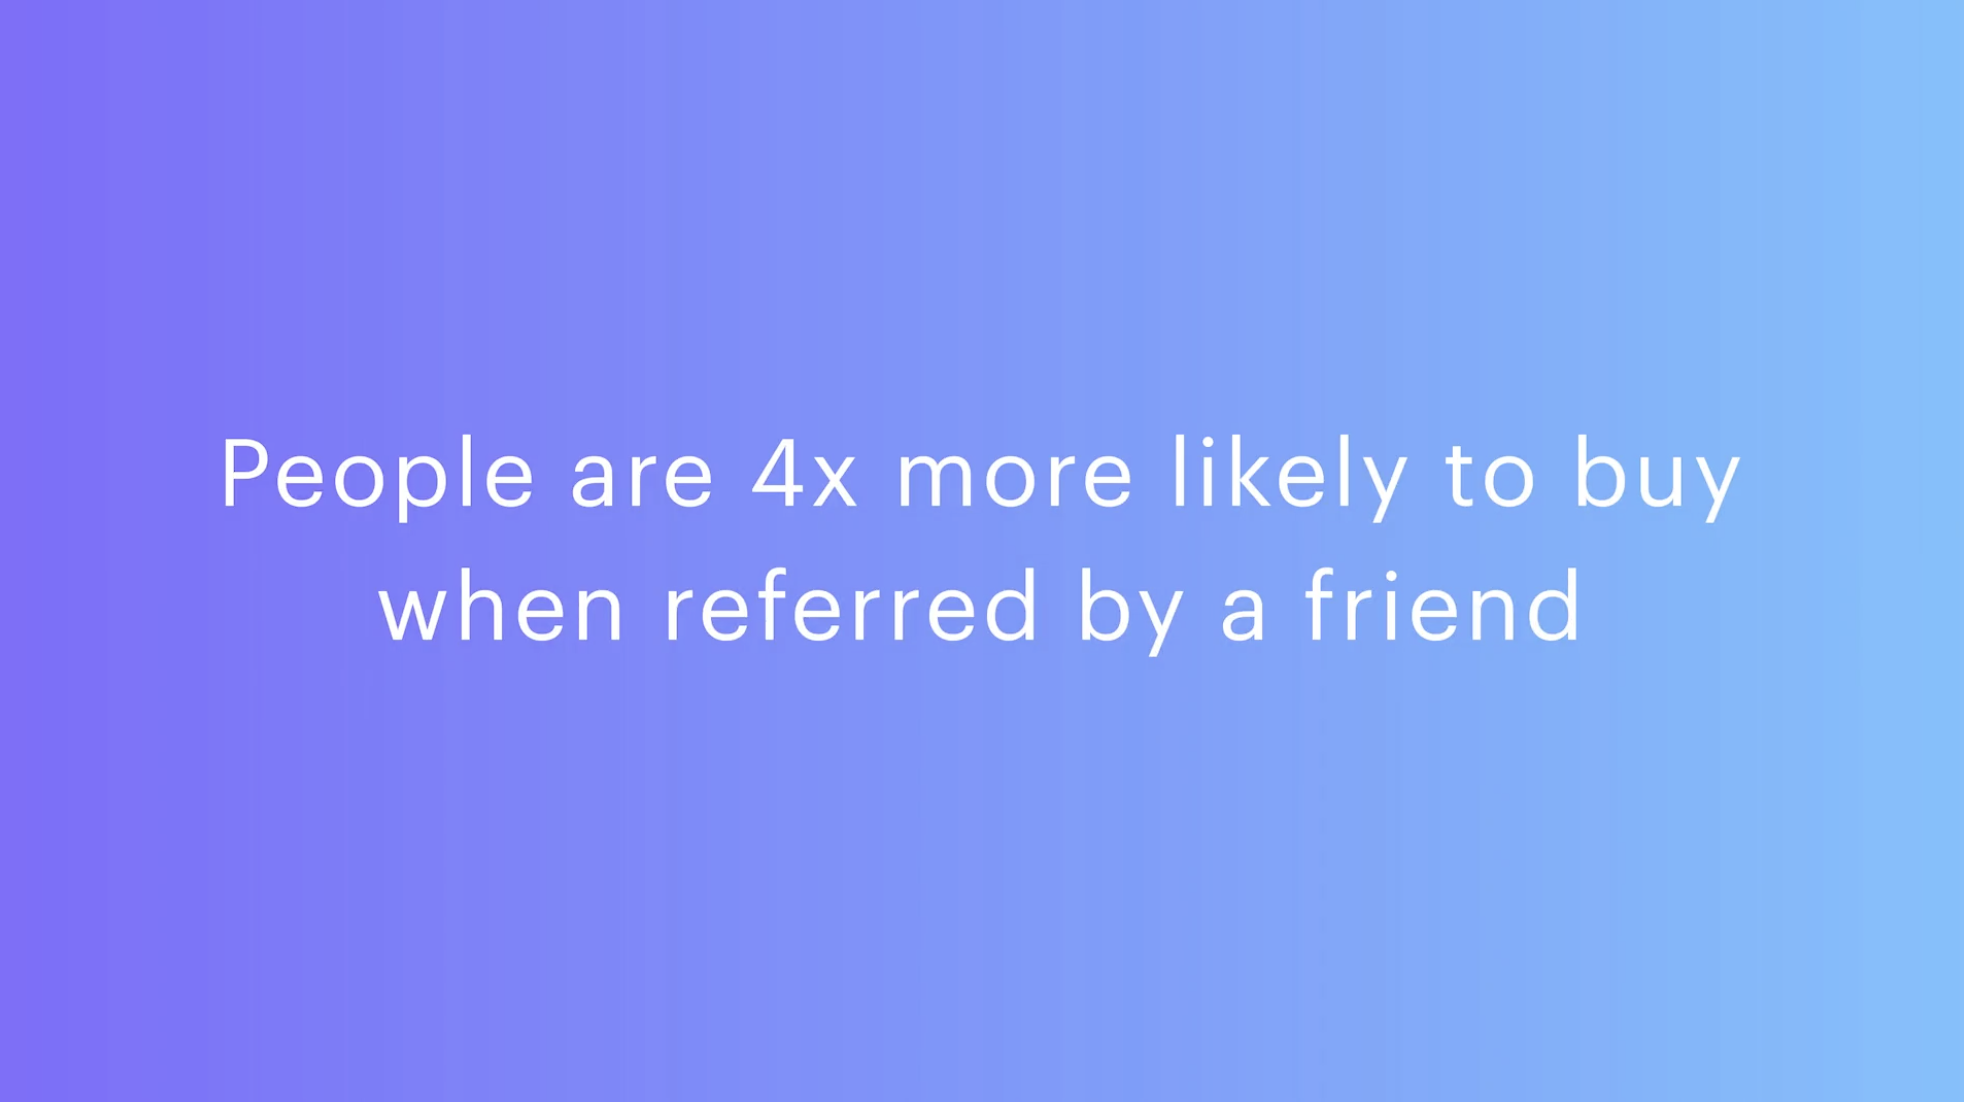 Email Minute #20: Examples of referral emails and referral email success from Shane Phair: People are 4x more likely to buy when referred by a friend